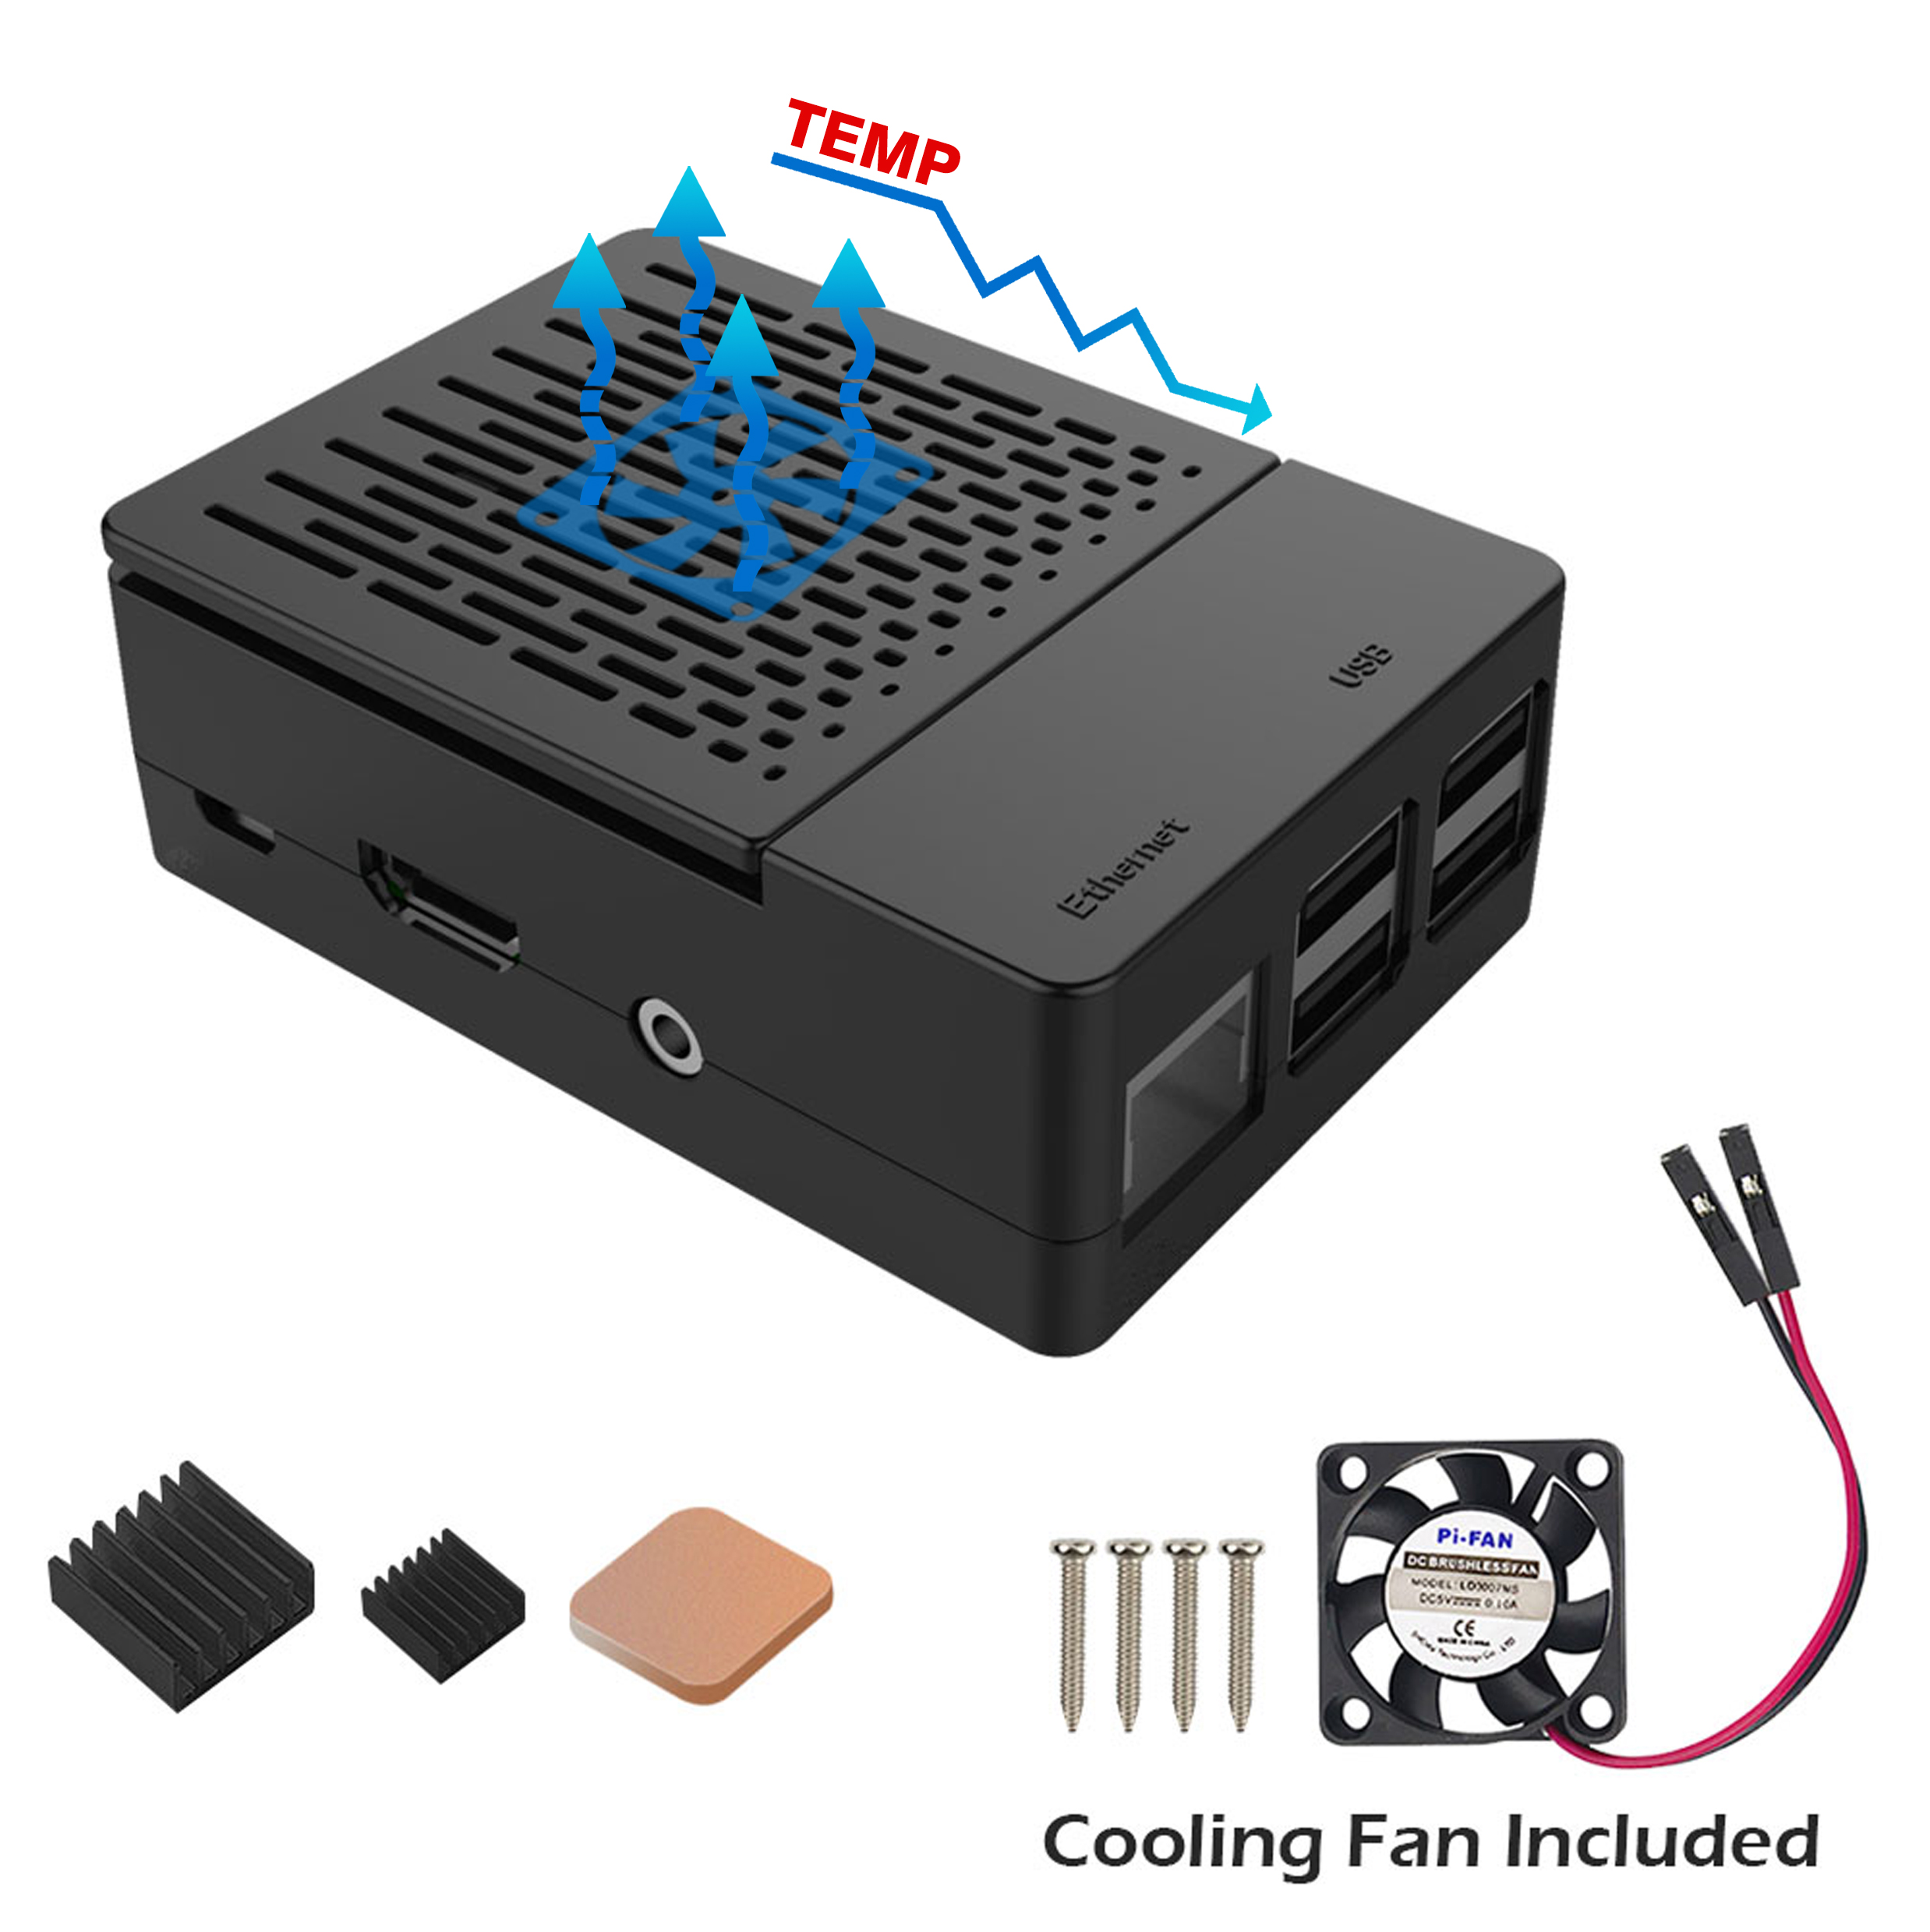 Black/White Assembled Exclouse Case + Quiet Cooling Fan + Heatsink Support GPIO or Camera For Raspberry Pi 3/2/B+ 10